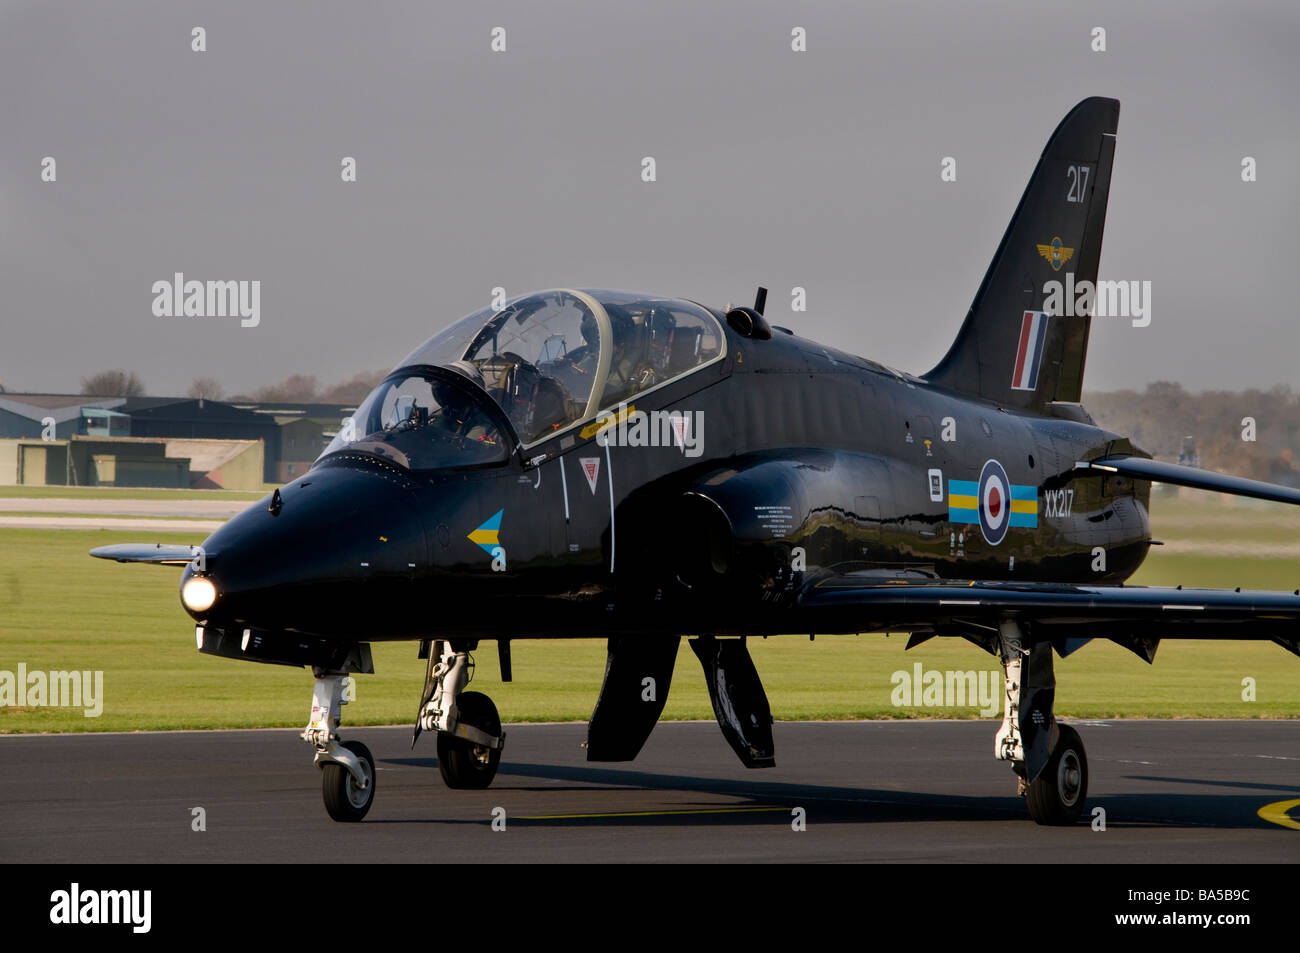 A Hawk jet trainer operated by the United Kingdoms Royal Navy Stock Photo